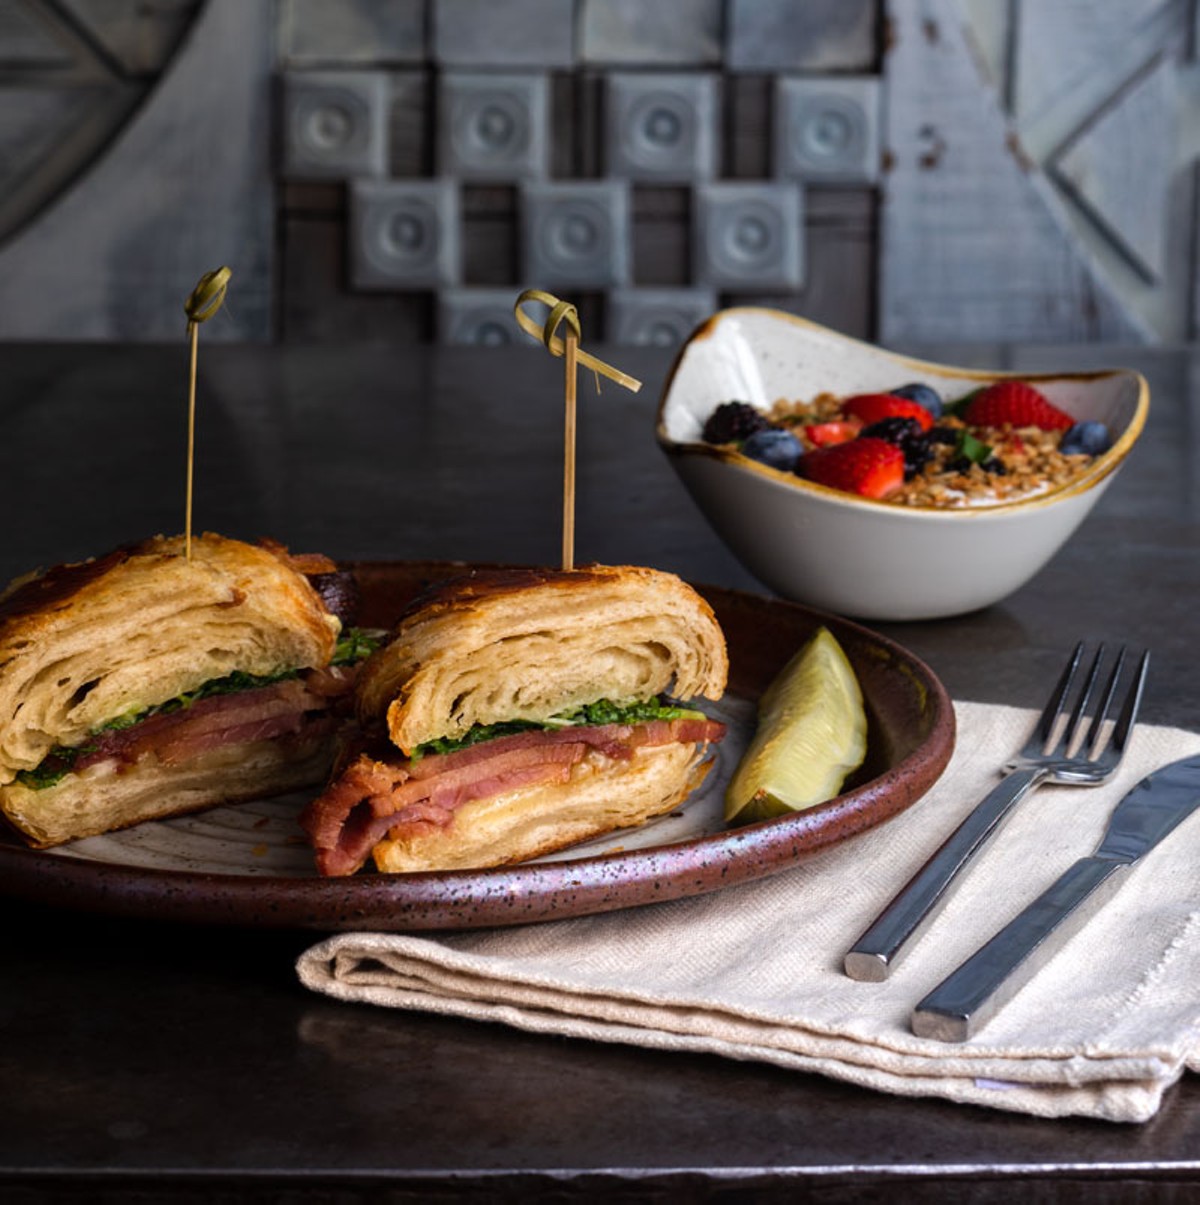 Otus Supply’s new brunch menu includes a ham and cheese croissant.